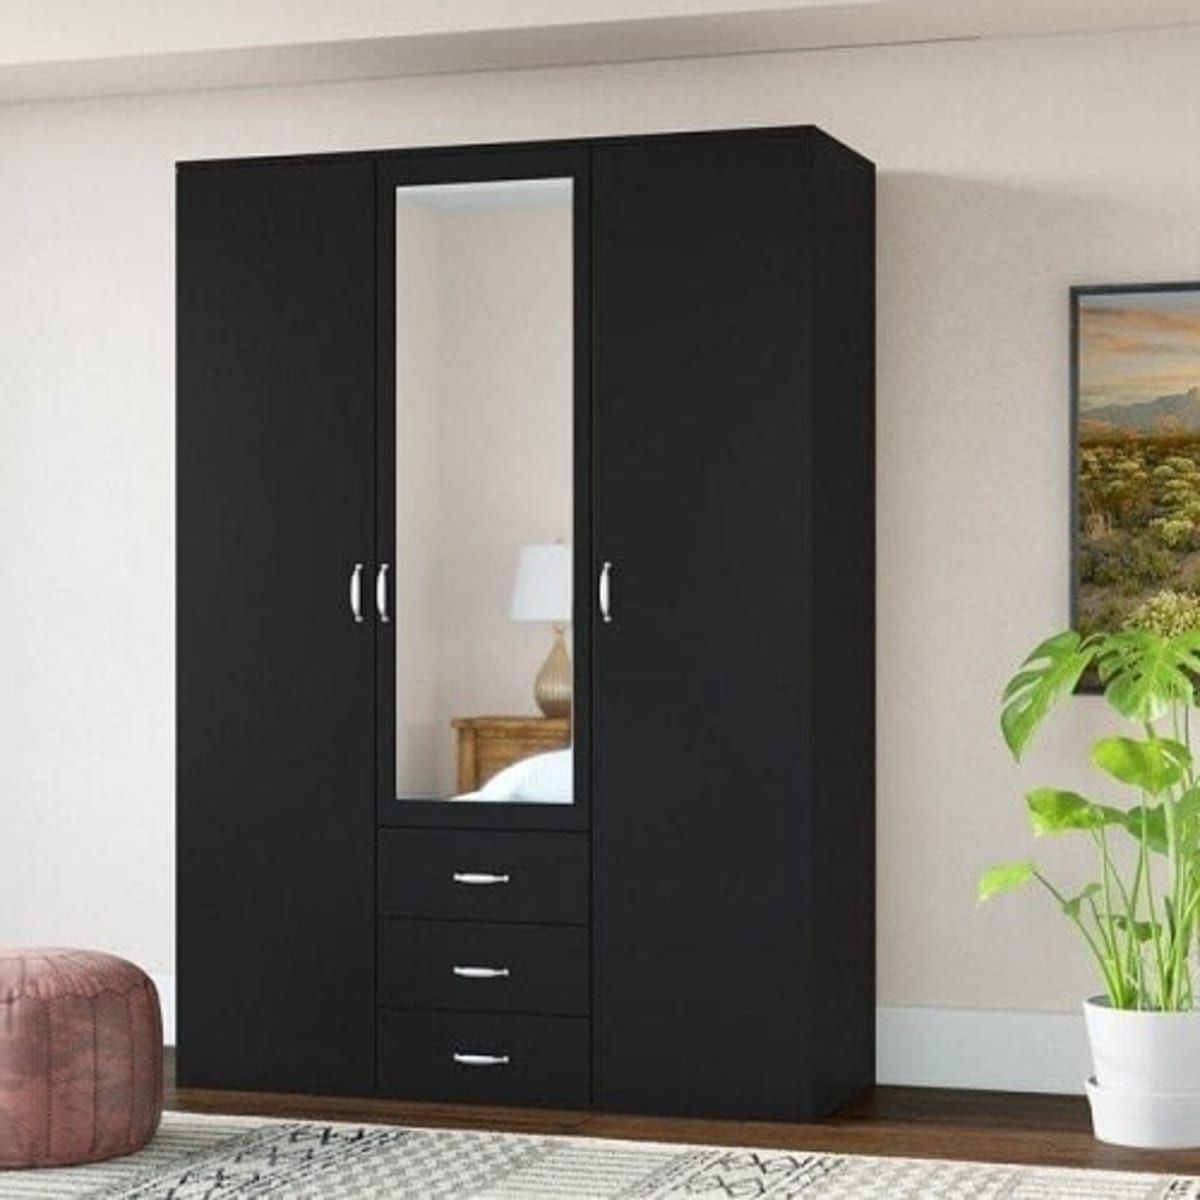 Beyond 3 Door Wardrobe With 3 Drawer And Mirror Black | Konga Online  Shopping Inside Wardrobes With 3 Drawers (View 7 of 20)